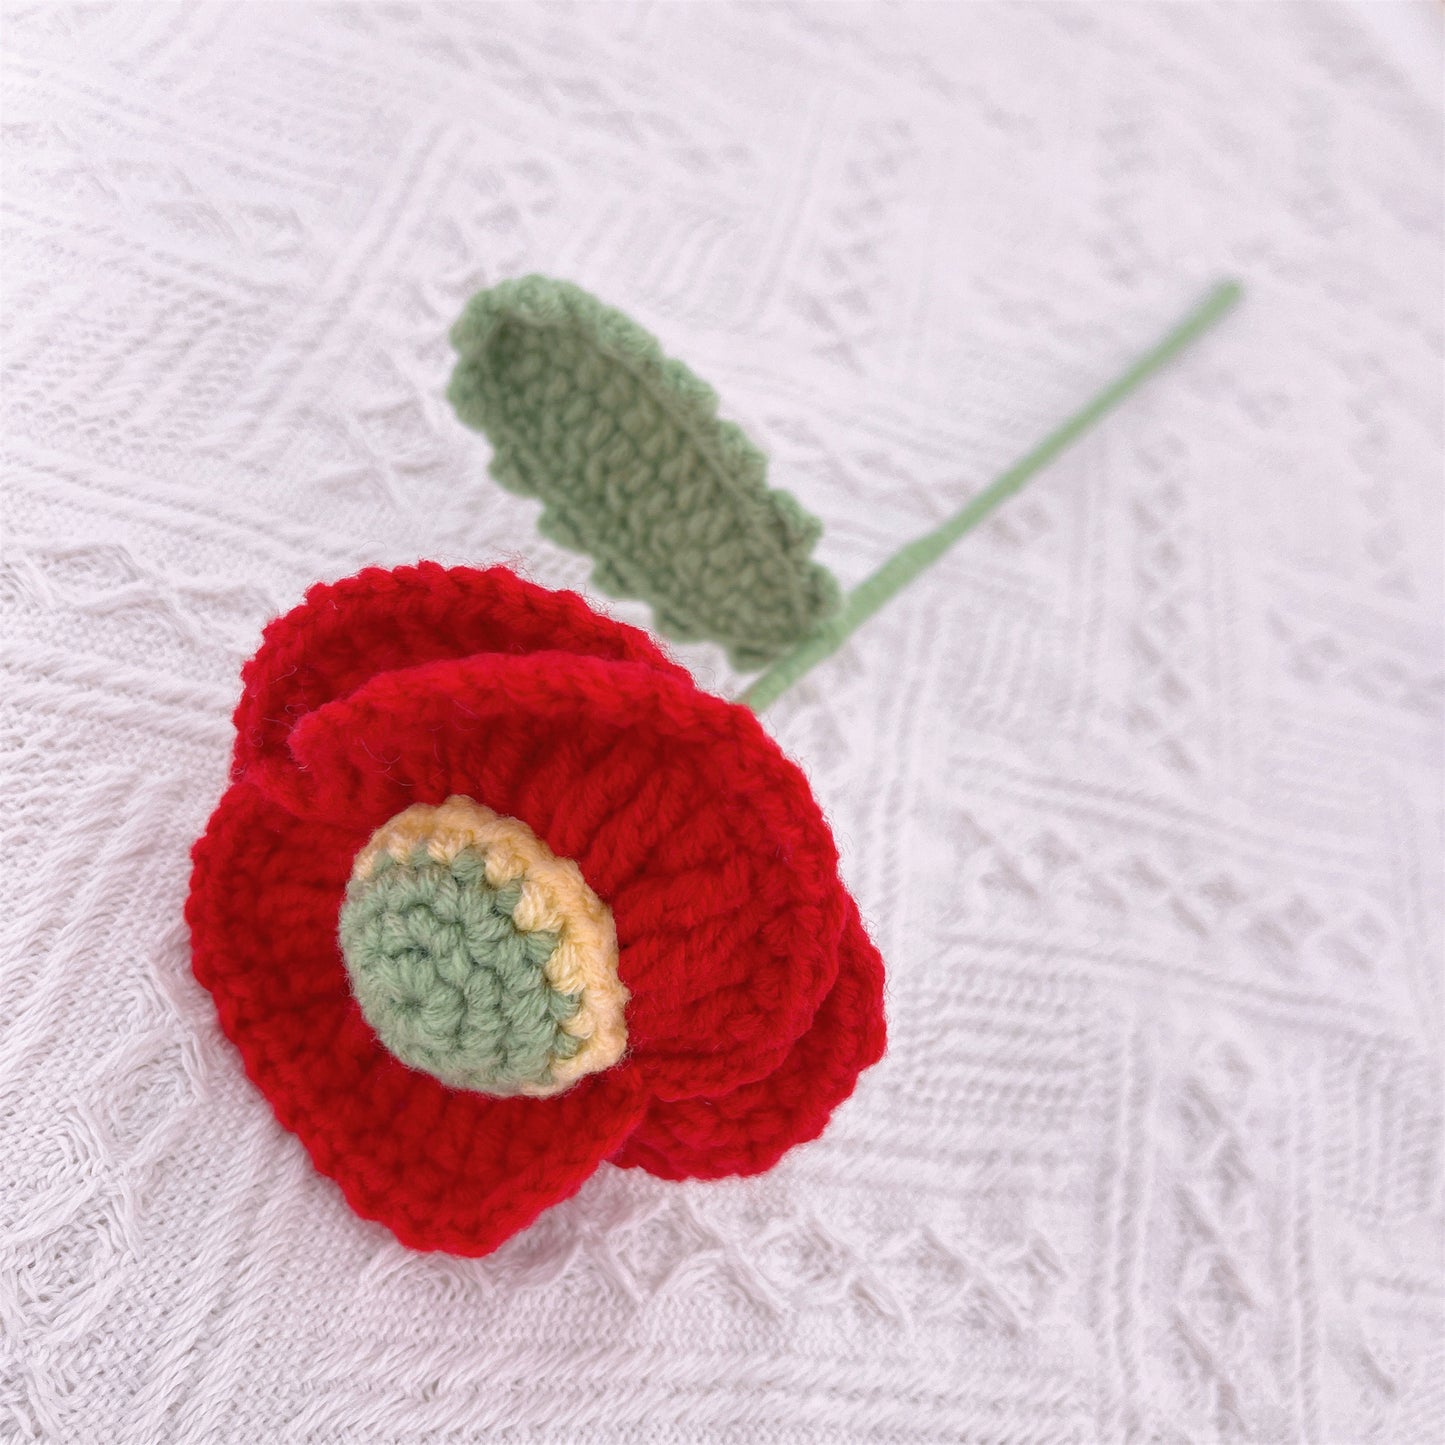 Poppy Passion: Handcrafted Crochet Coquelicot Stake for a Bold Garden Decor